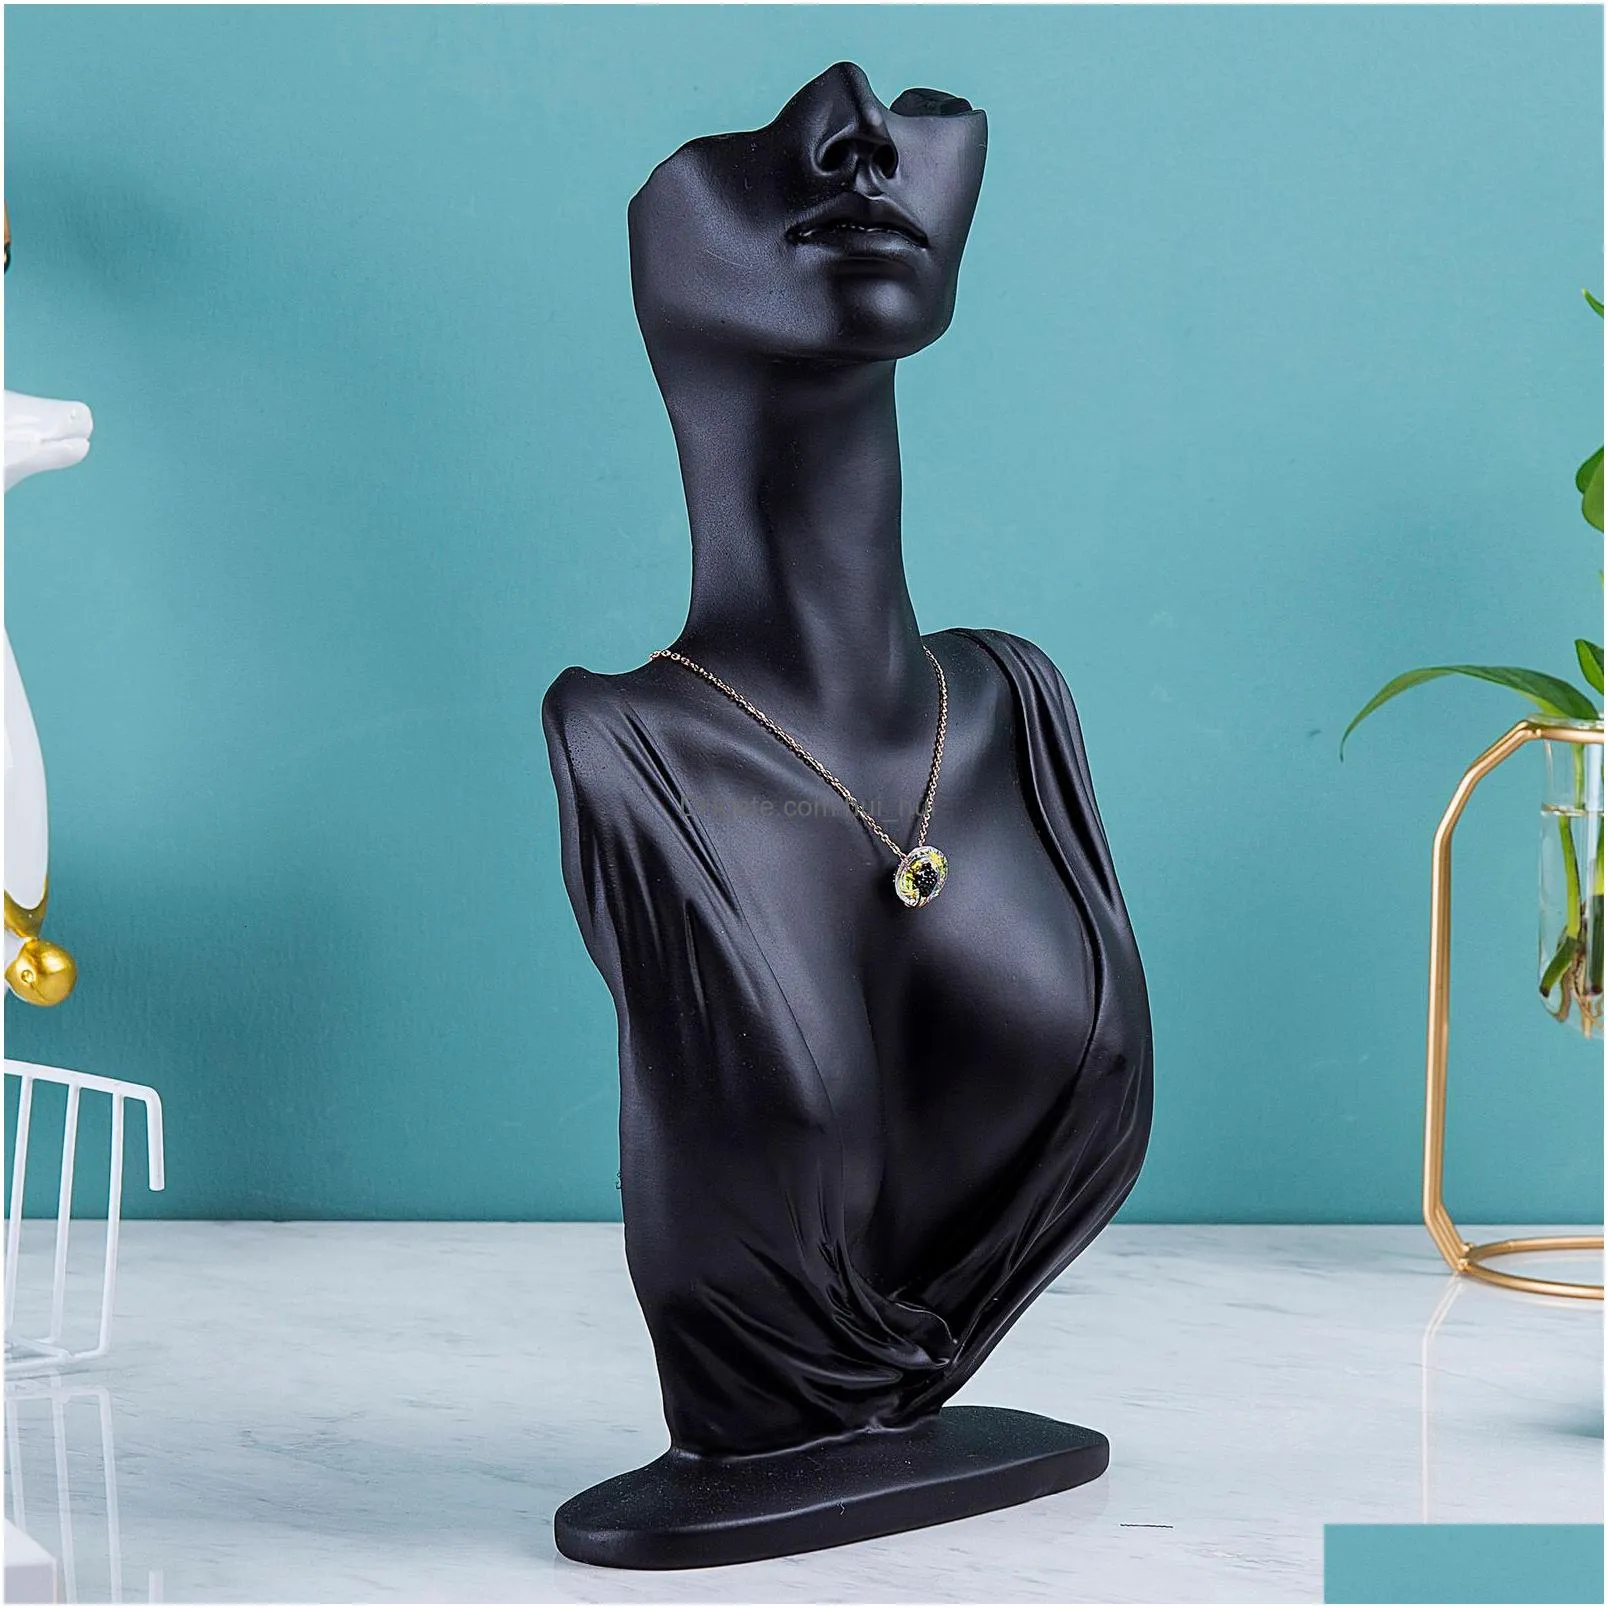 mannequin top selling lms 3 size resin medium side portrait model earrings necklace jewelry display stand necklace display props